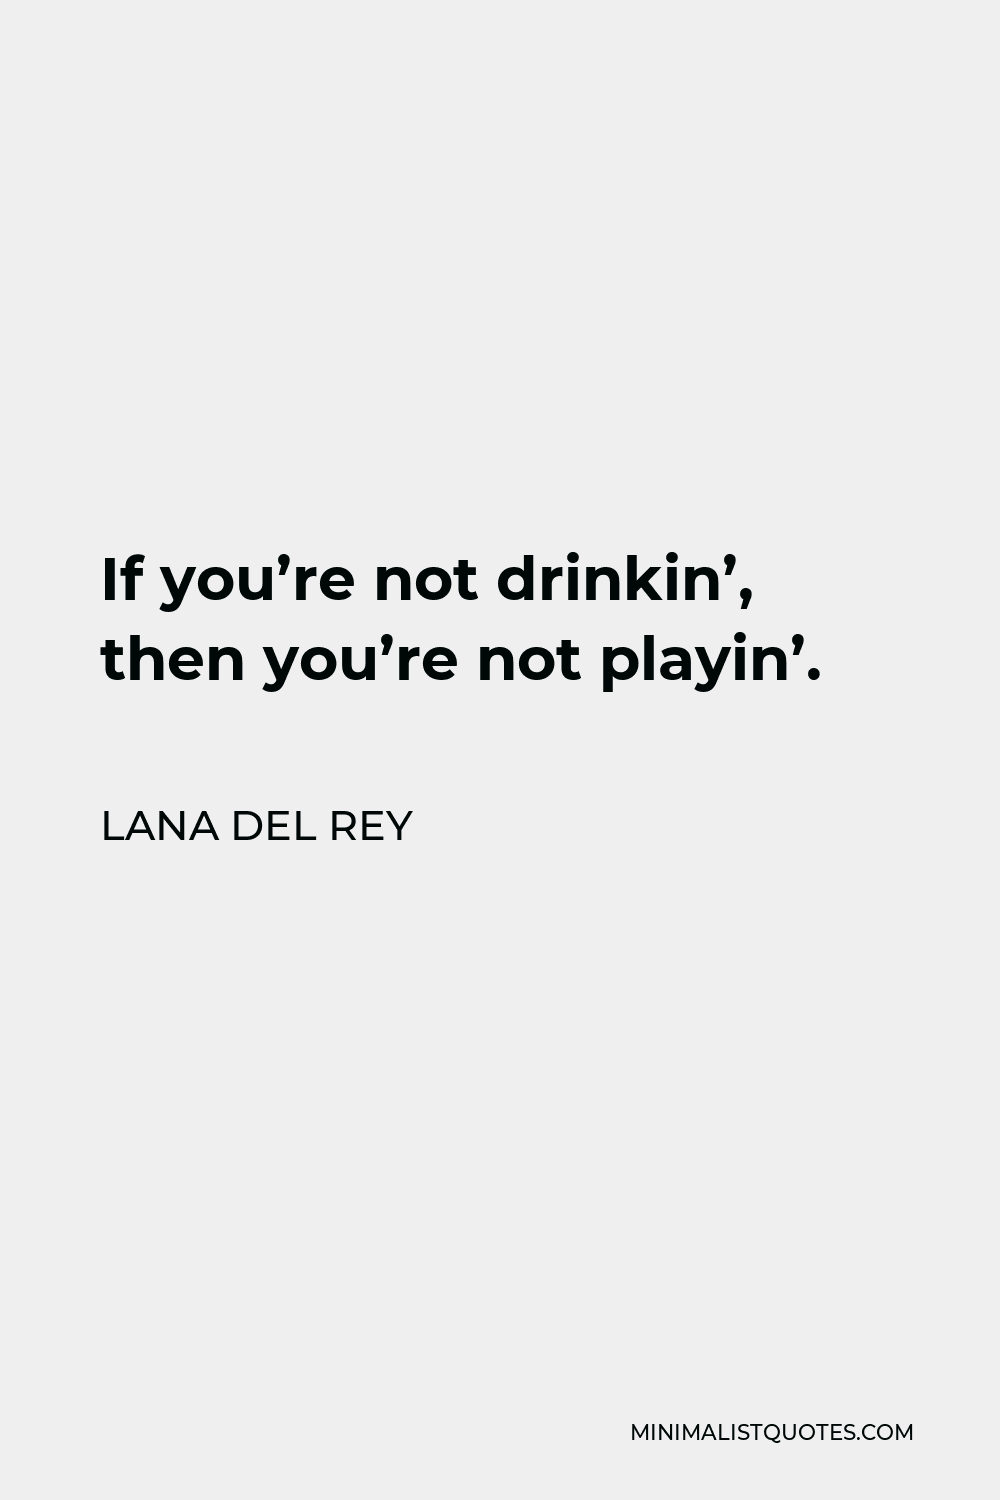 Lana Del Rey Quote - If you’re not drinkin’, then you’re not playin’.